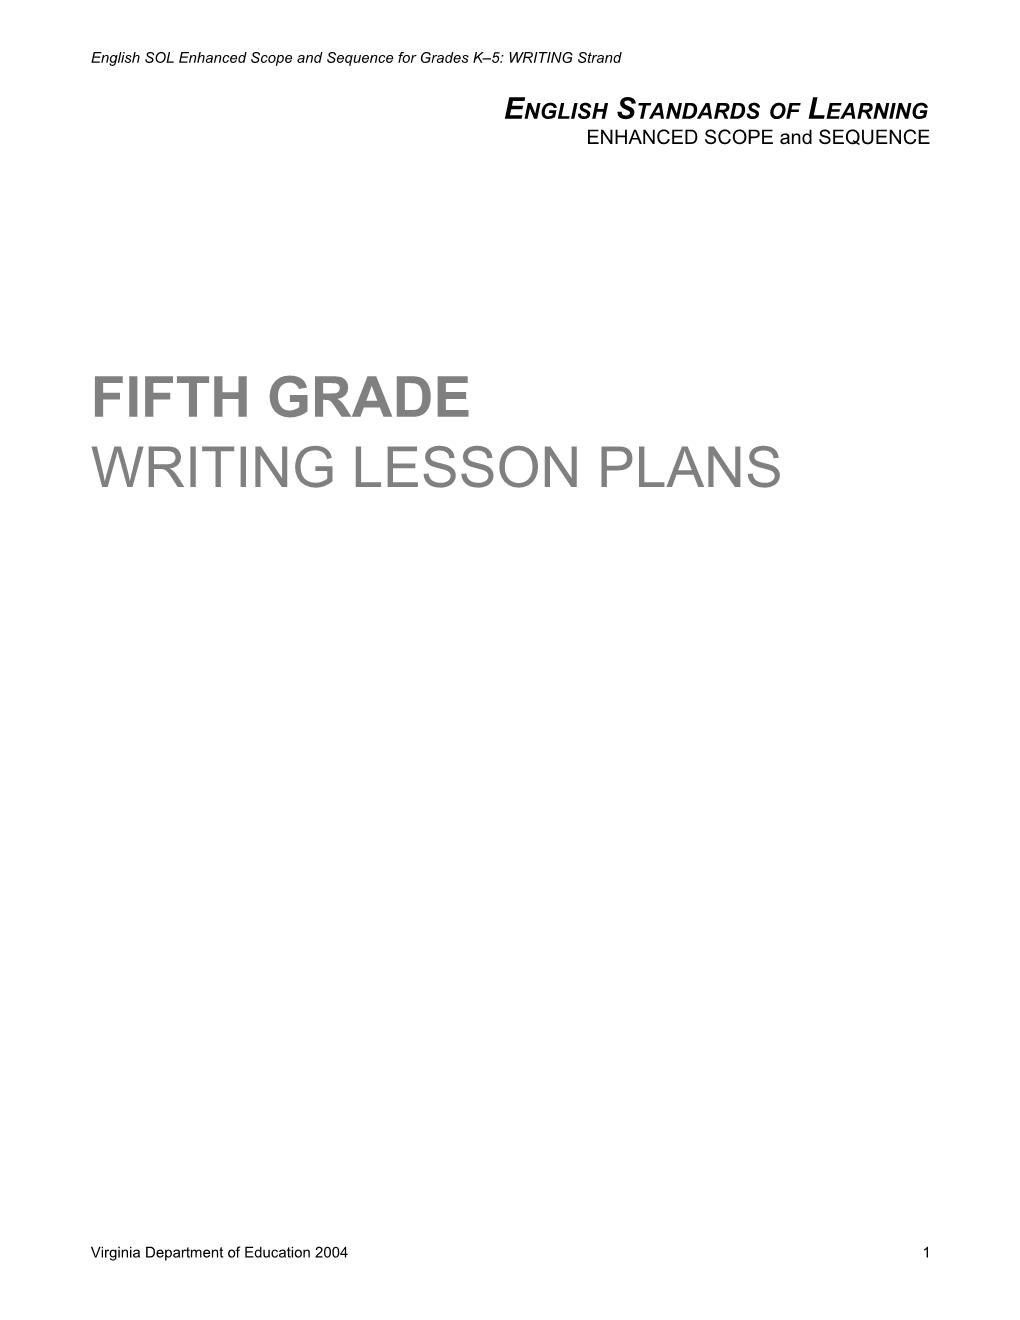 English SOL Enhanced Scope and Sequence for Grades K 5: WRITING Strand